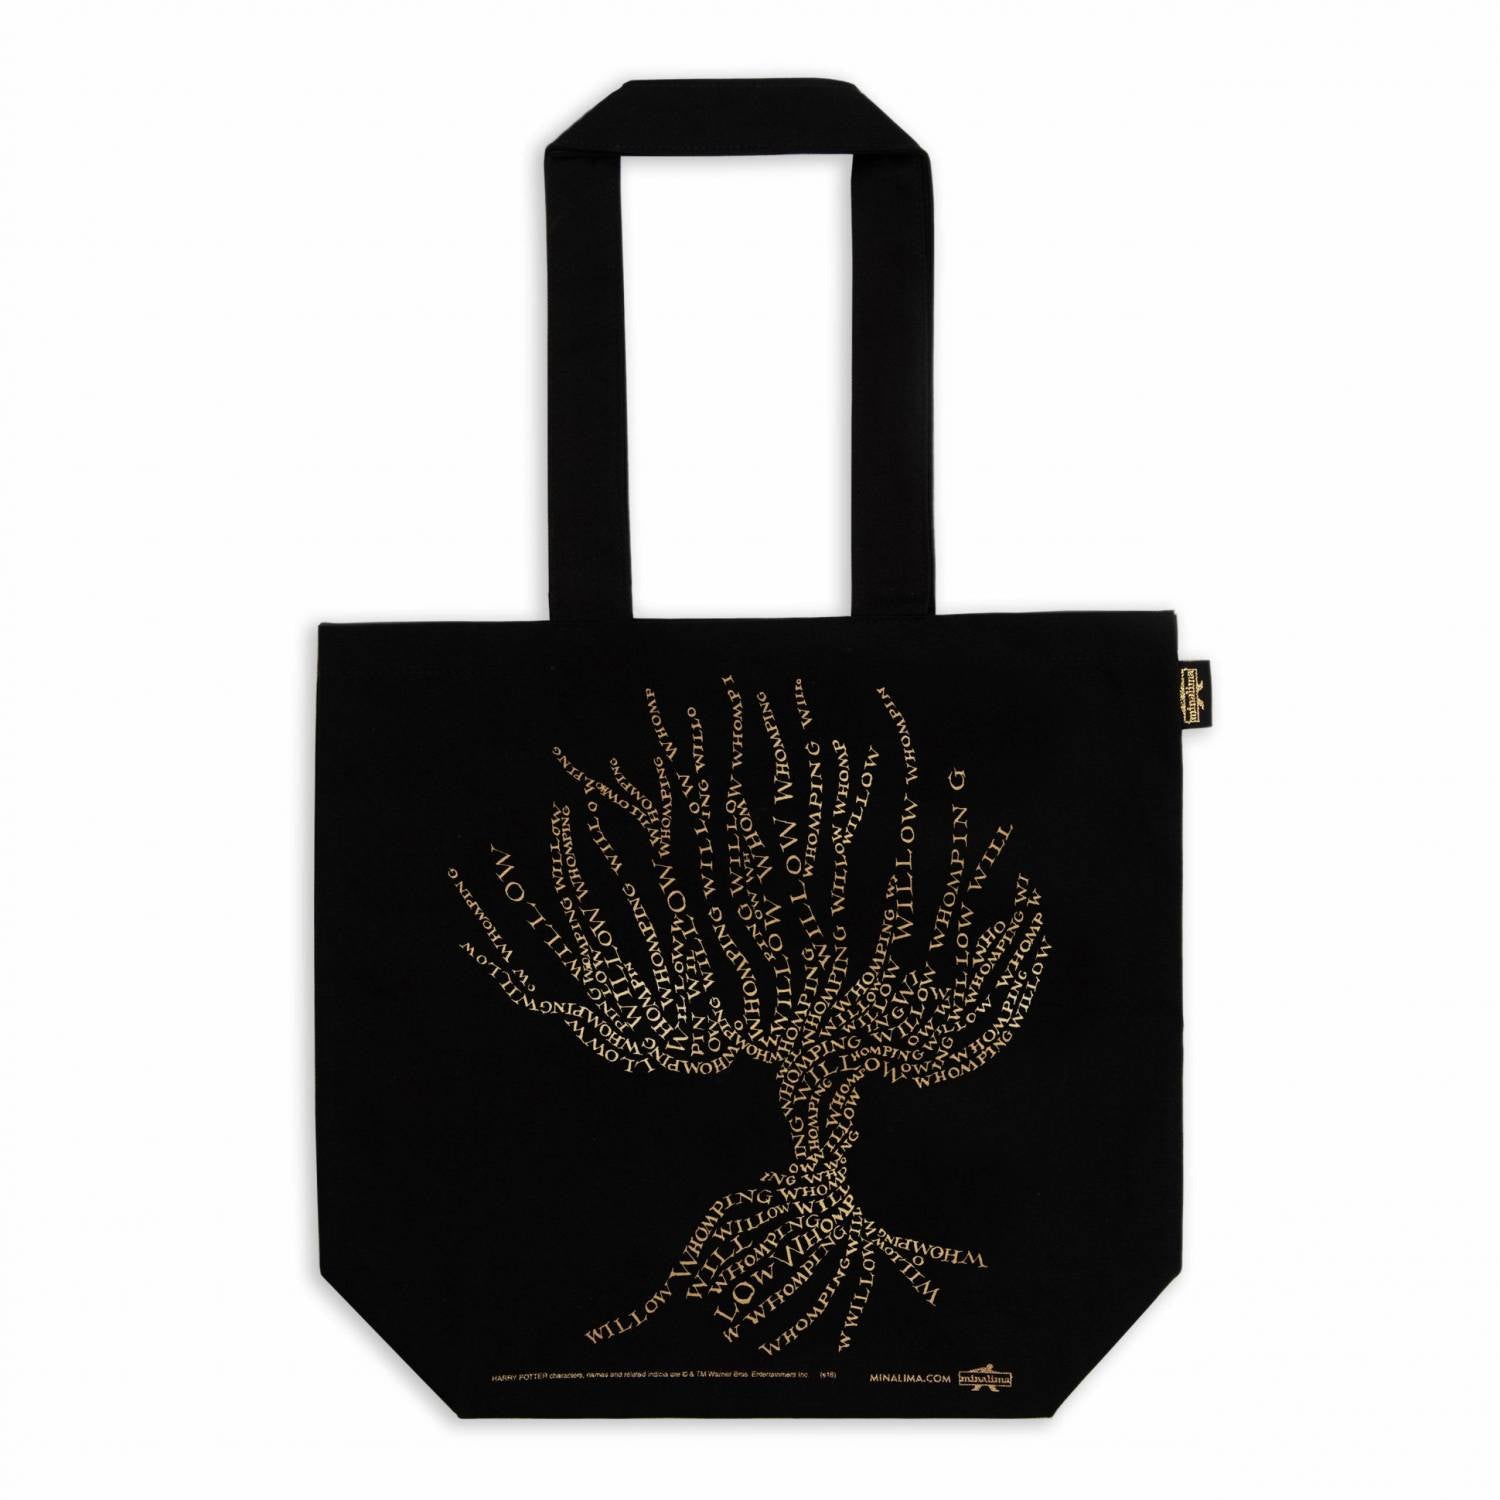 The Whomping Willow Tote